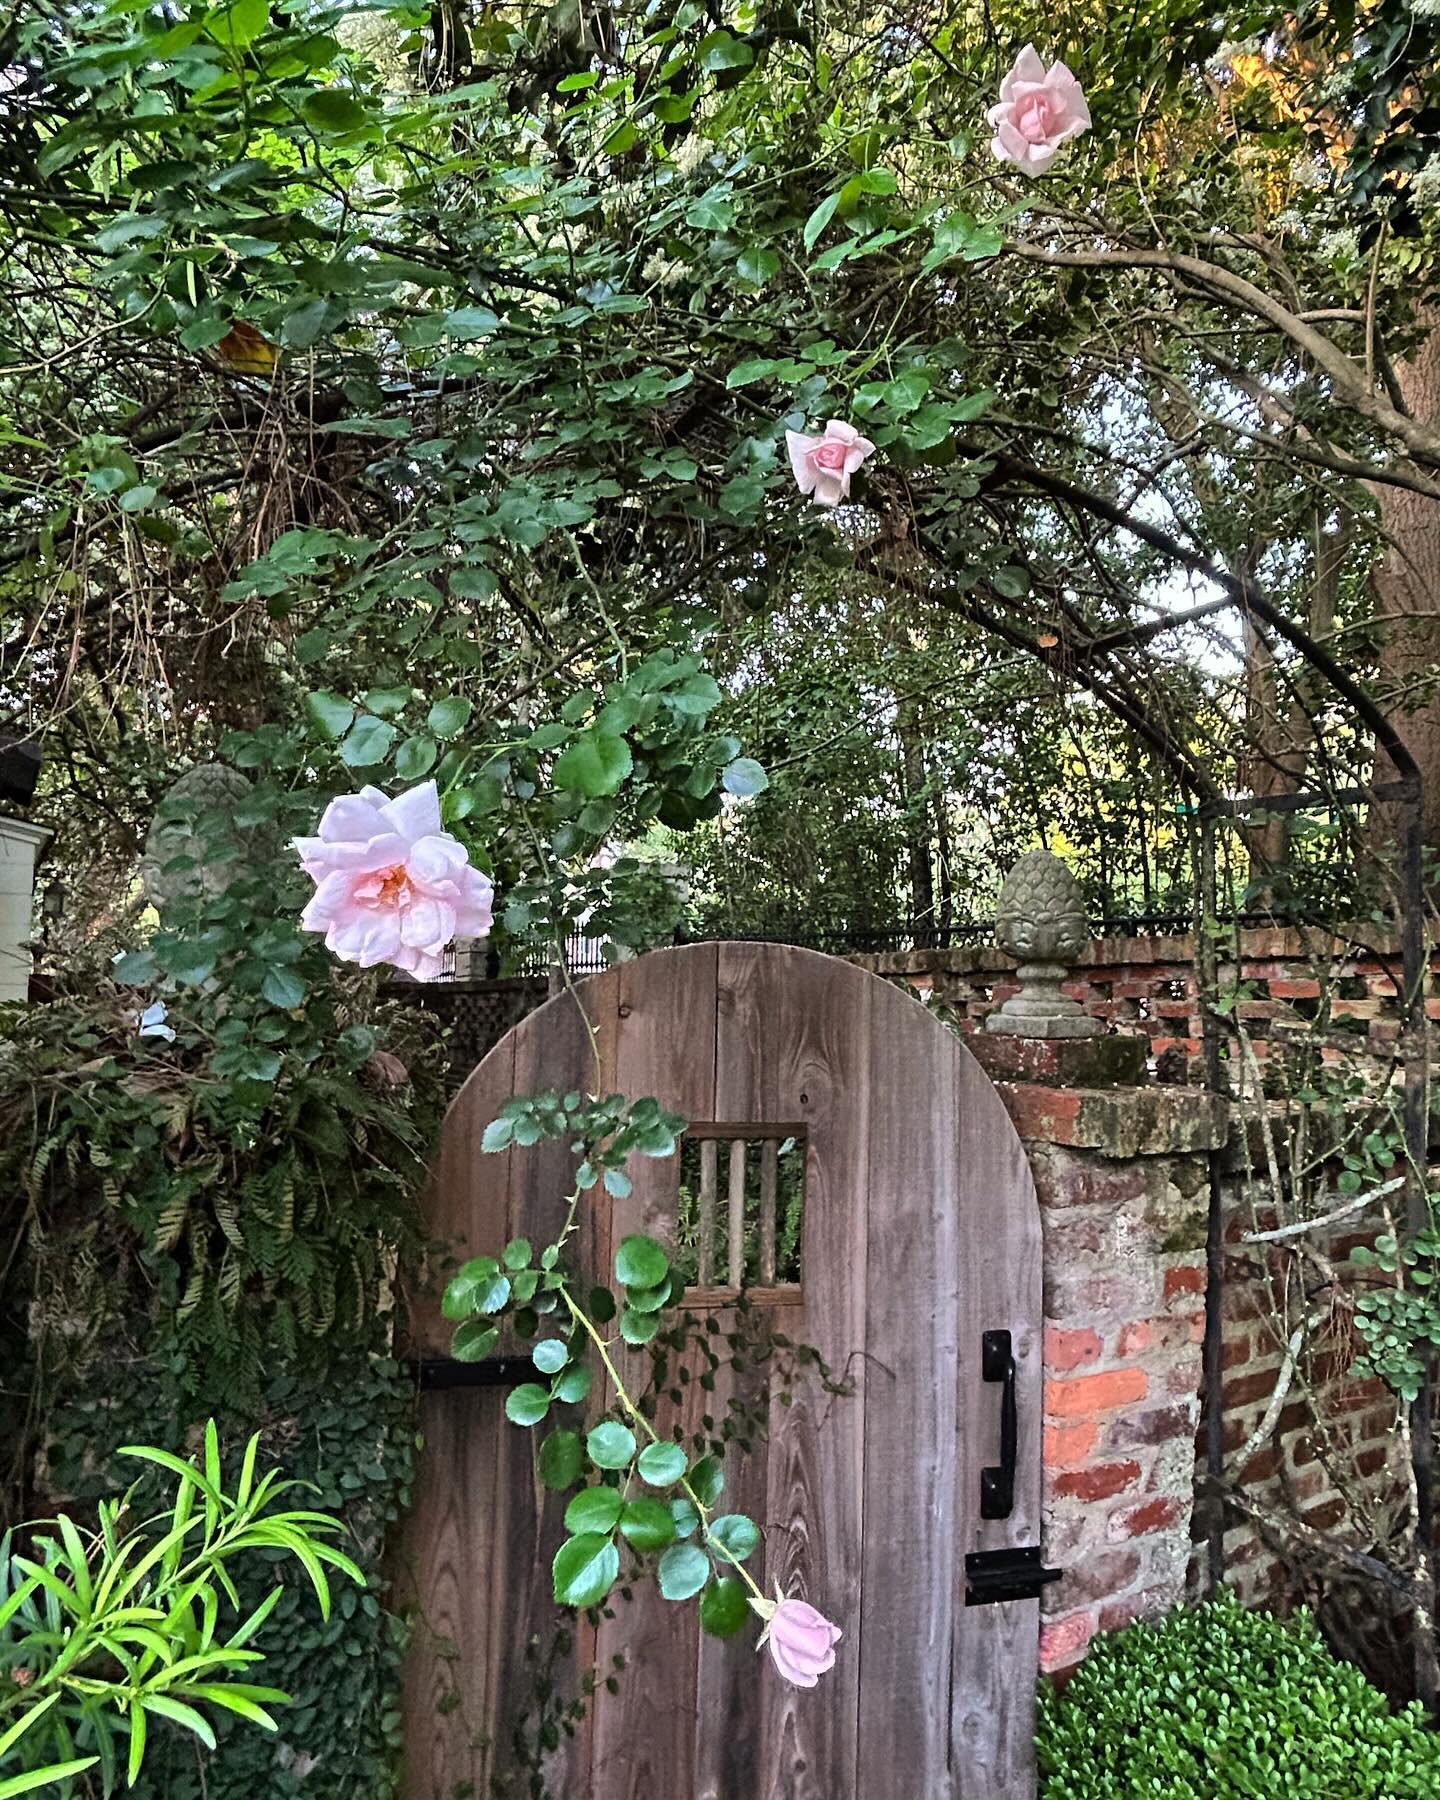 Tis&rsquo; the season for roses.
 
We thought this New Dawn Rose was a goner when we purchased our home. The vine had zero foliage. After cutting back some tree limbs to allow for light, she is slowly making a comeback.